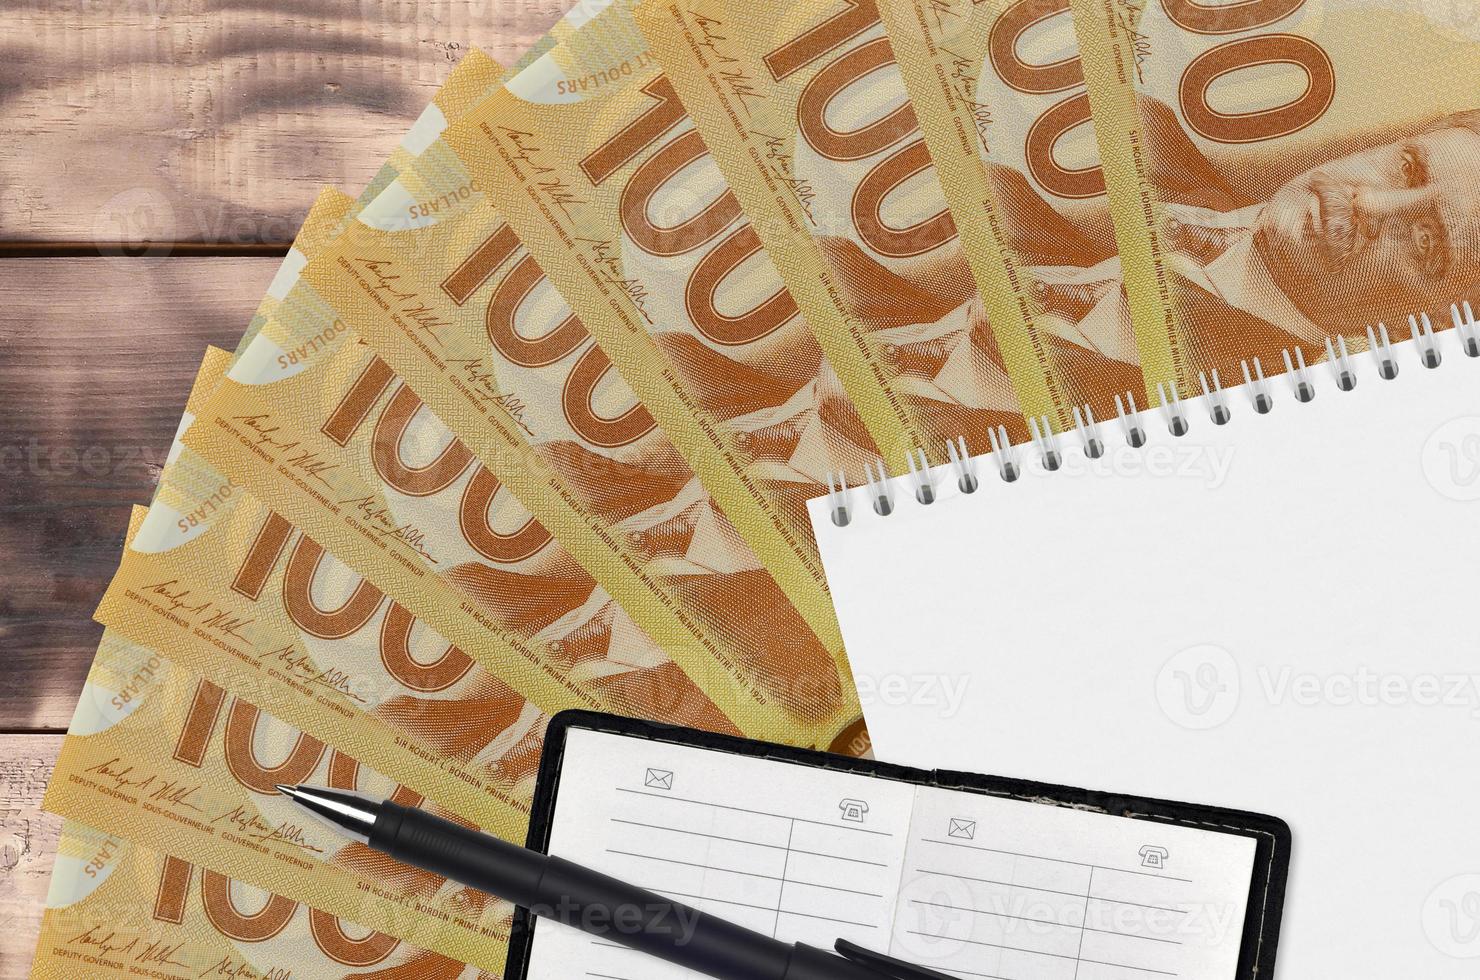 100 Canadian dollars bills fan and notepad with contact book and black pen. Concept of financial planning and business strategy photo